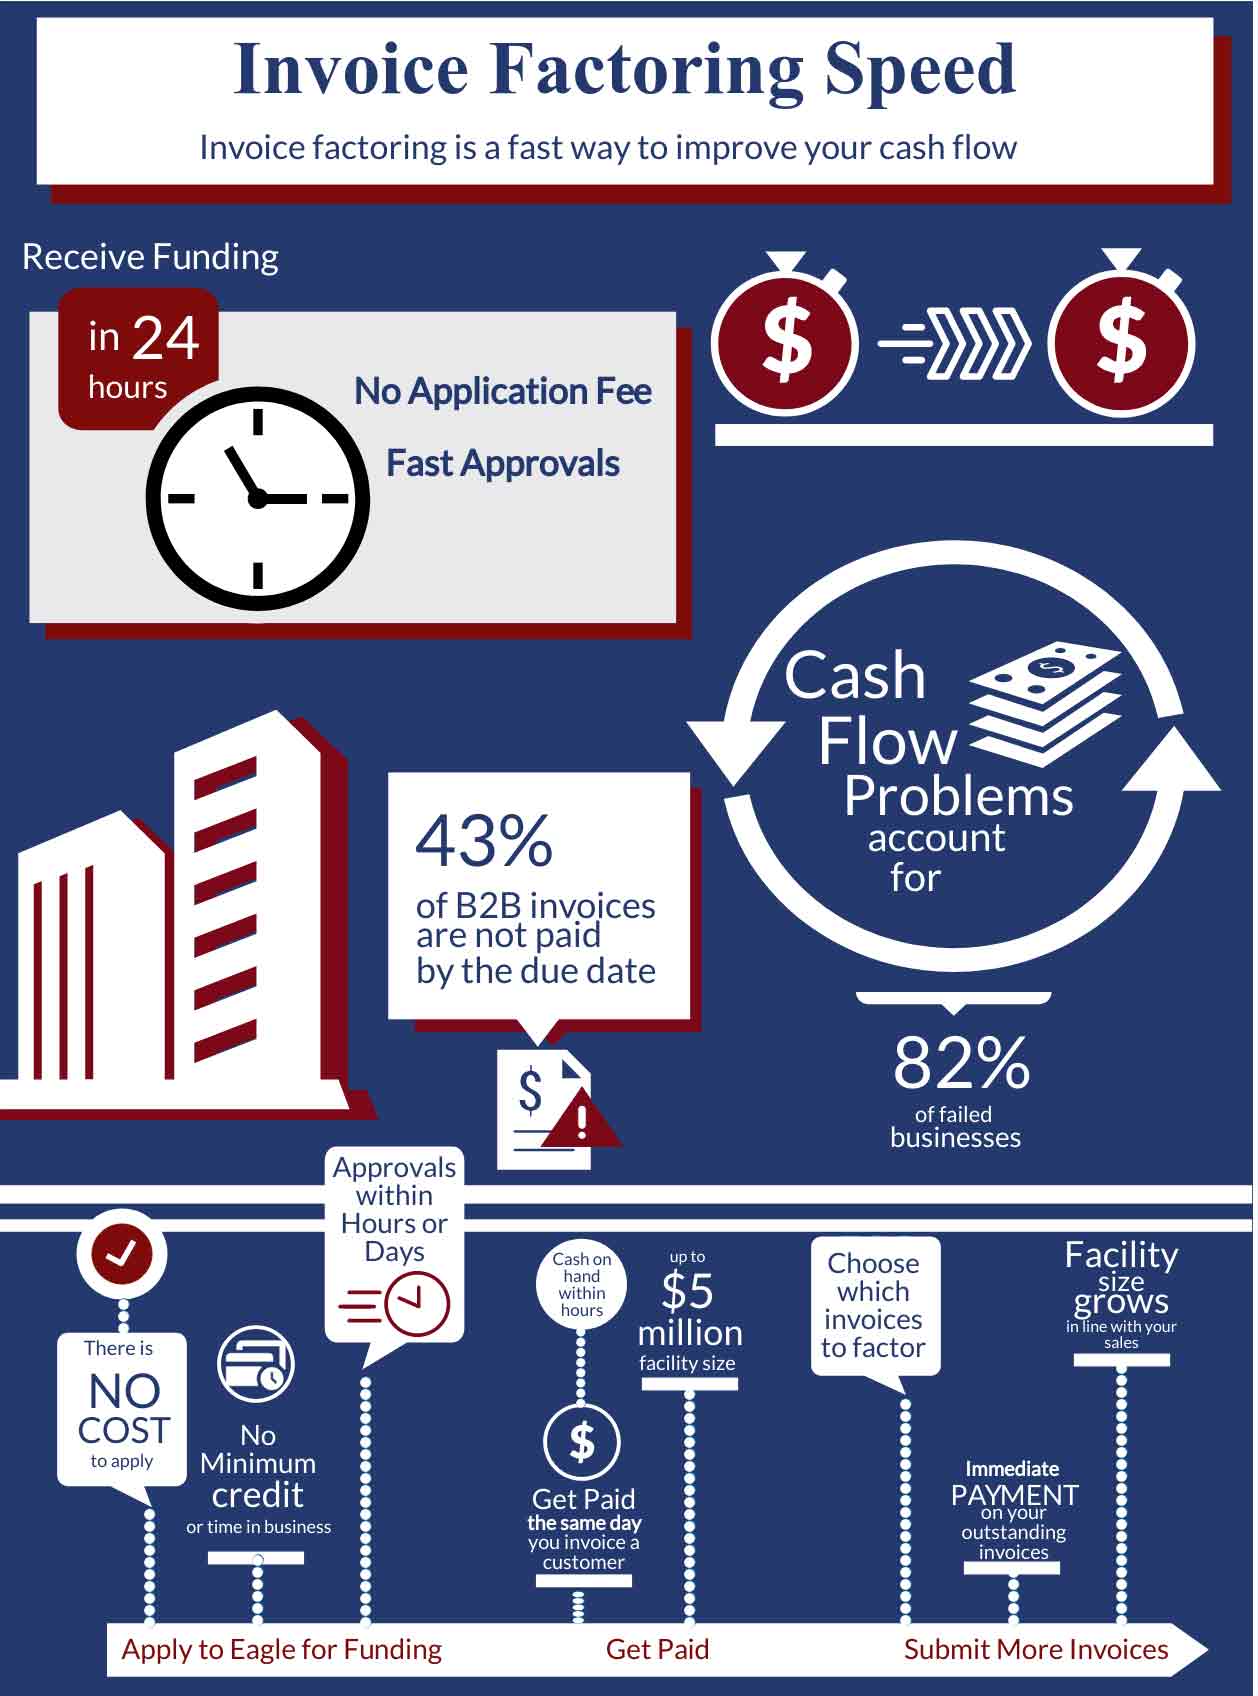 infographic showing the speed of invoice factoring and that businesses can get funding in 24 hours